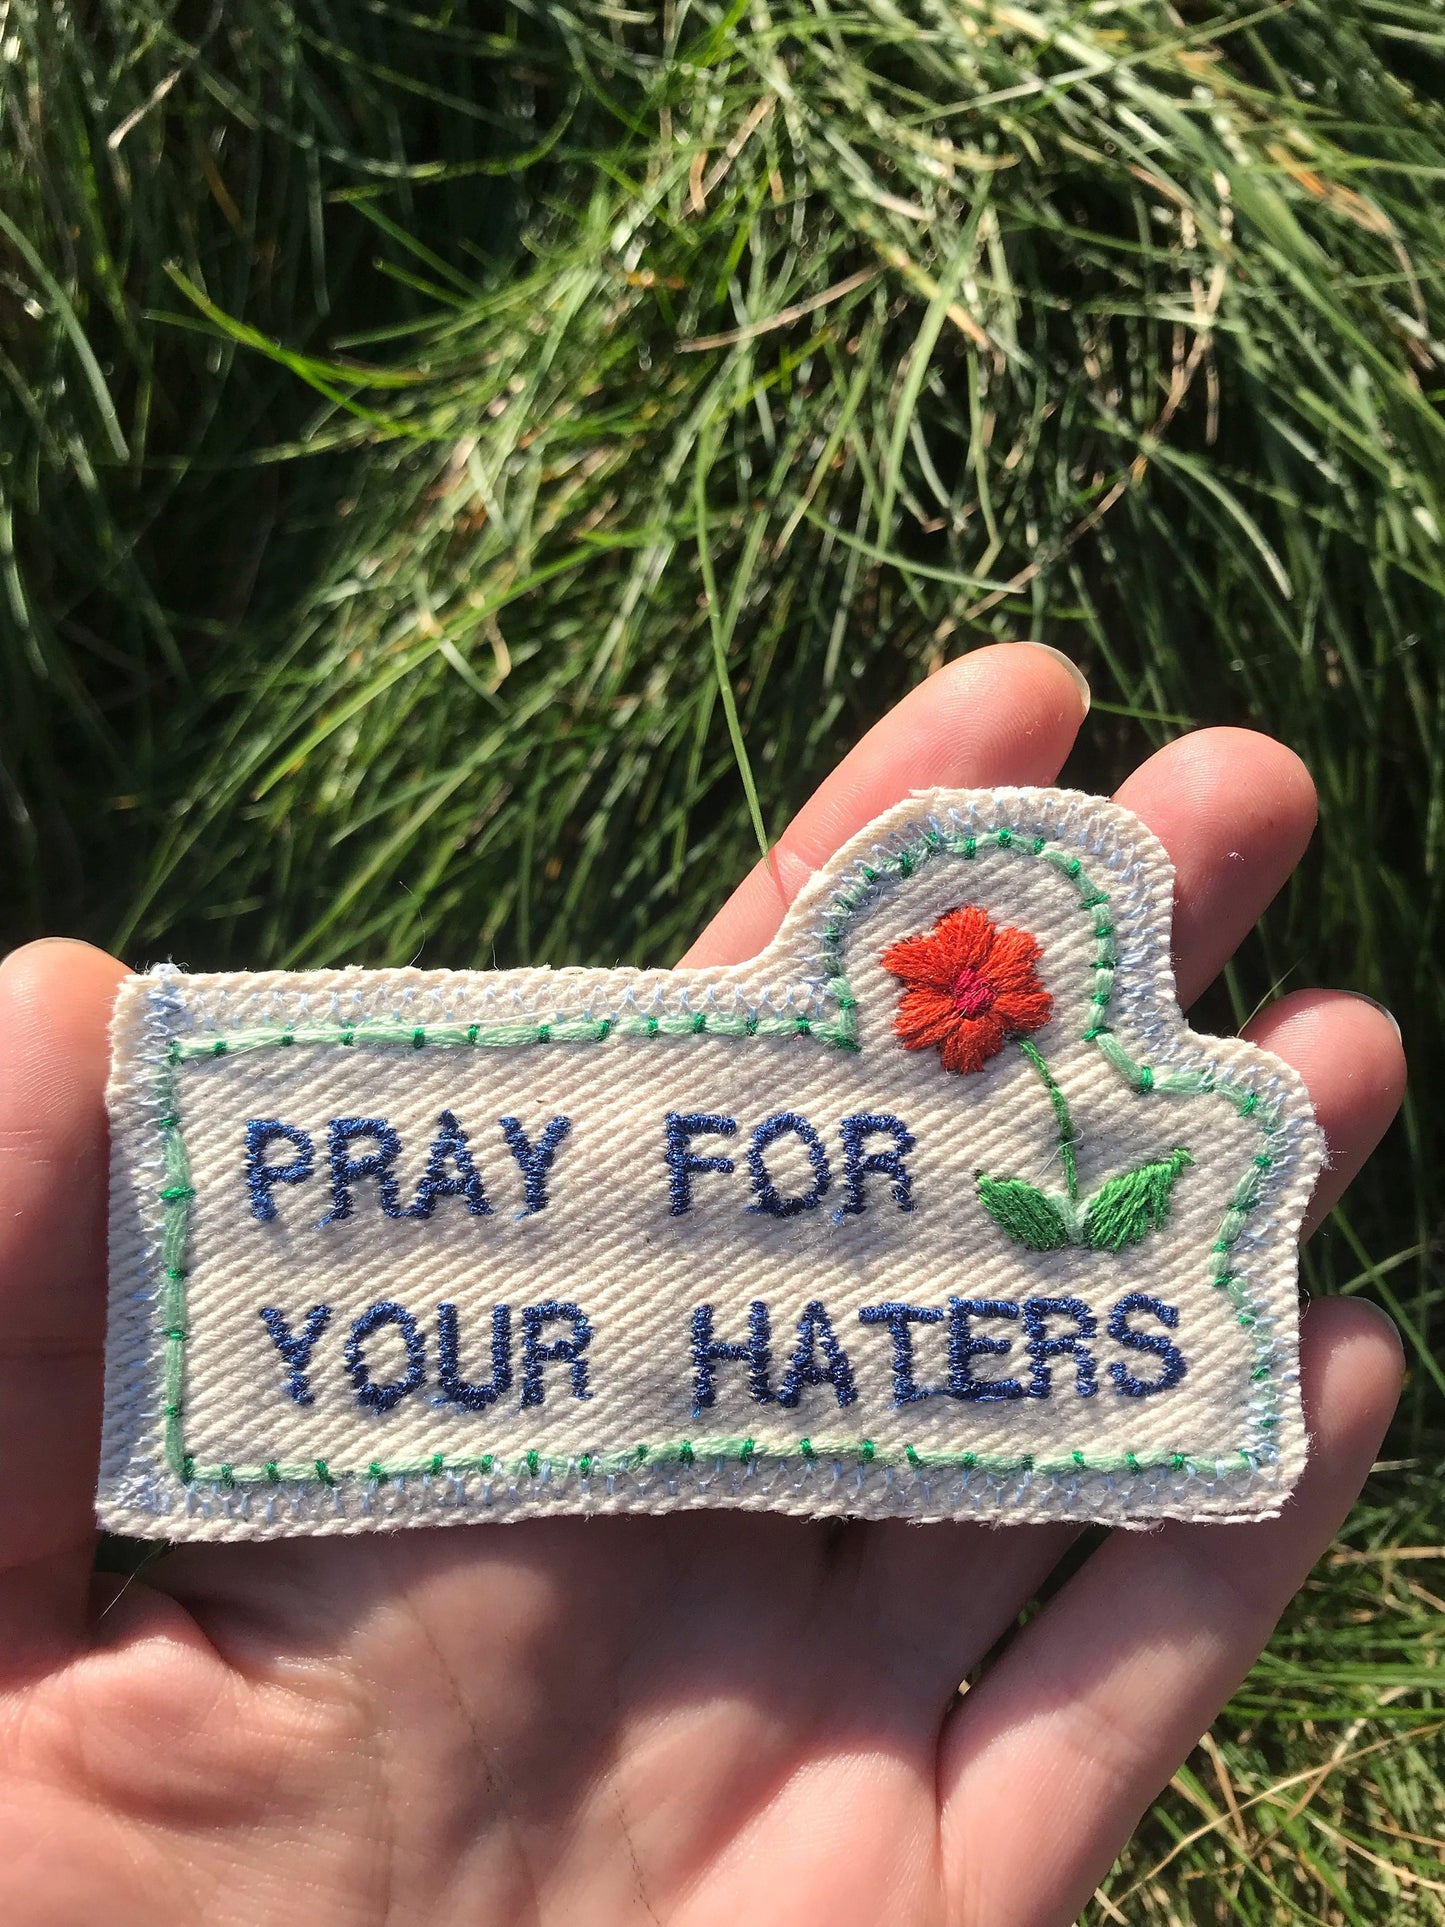 Pray for Your Haters - Handmade Embroidered Patch